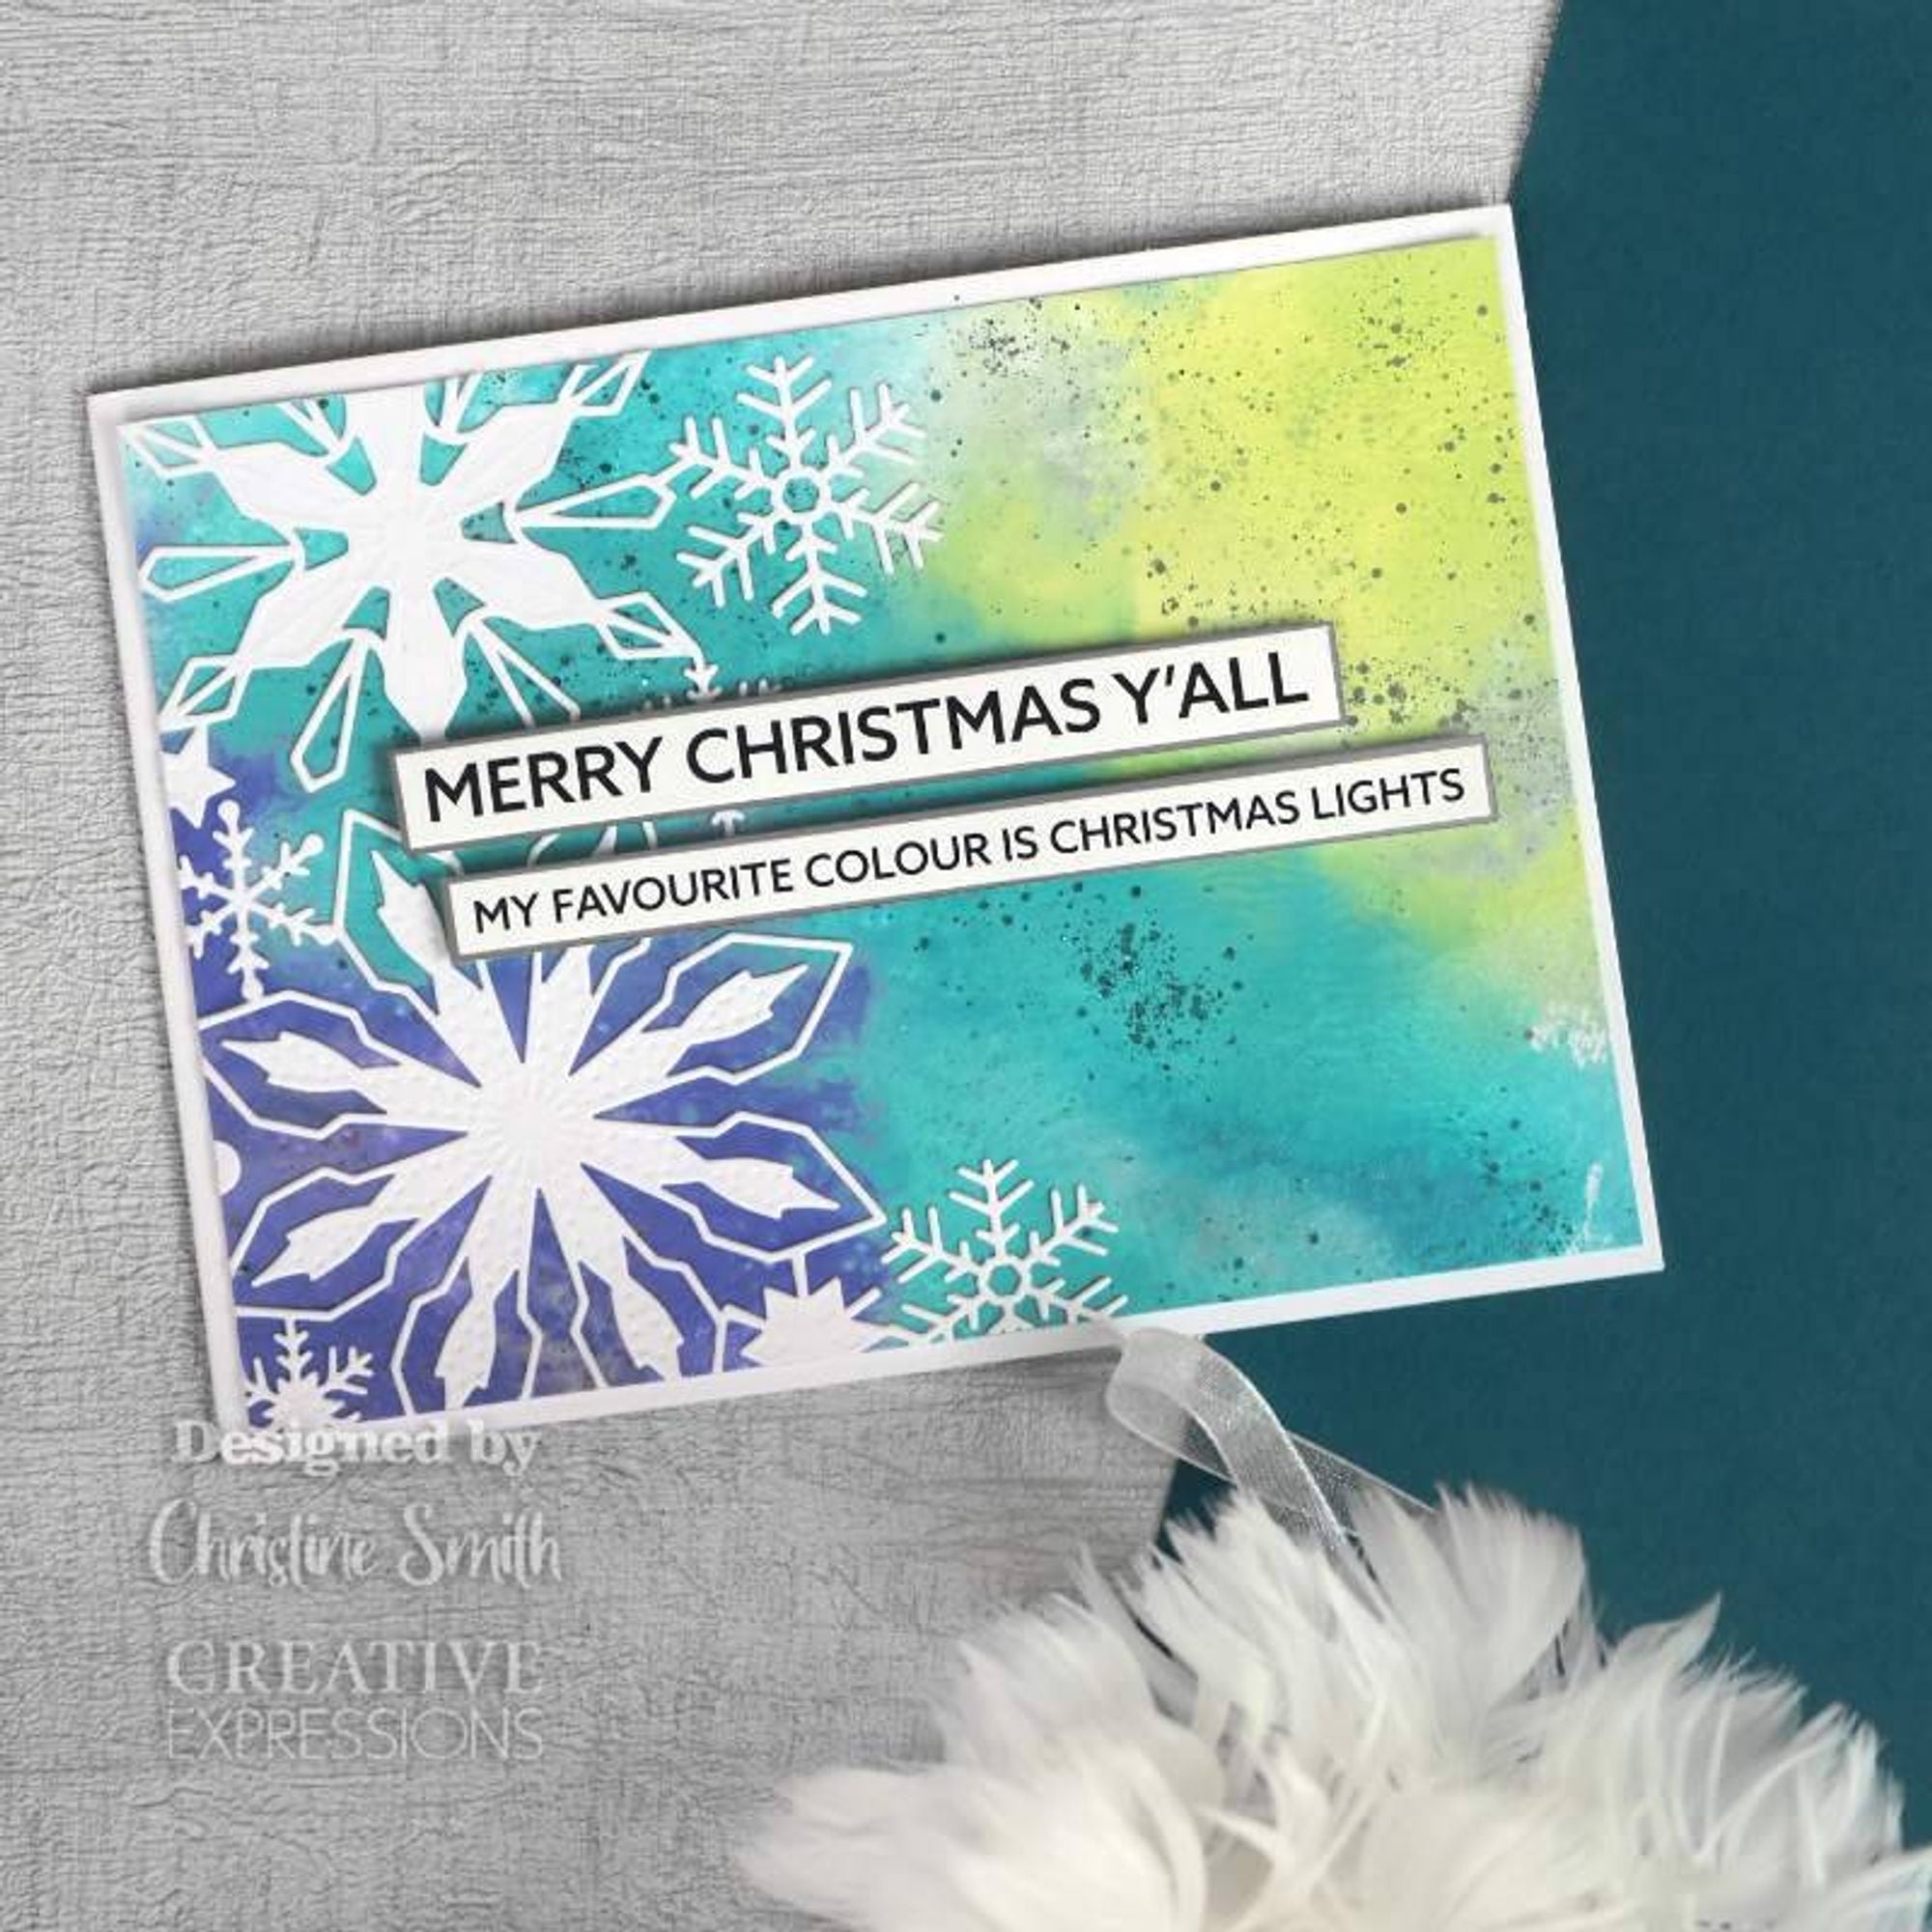 Creative Expressions Wordies Sentiment Sheets - Winter Wishes Pk 4 6 in x 8 in